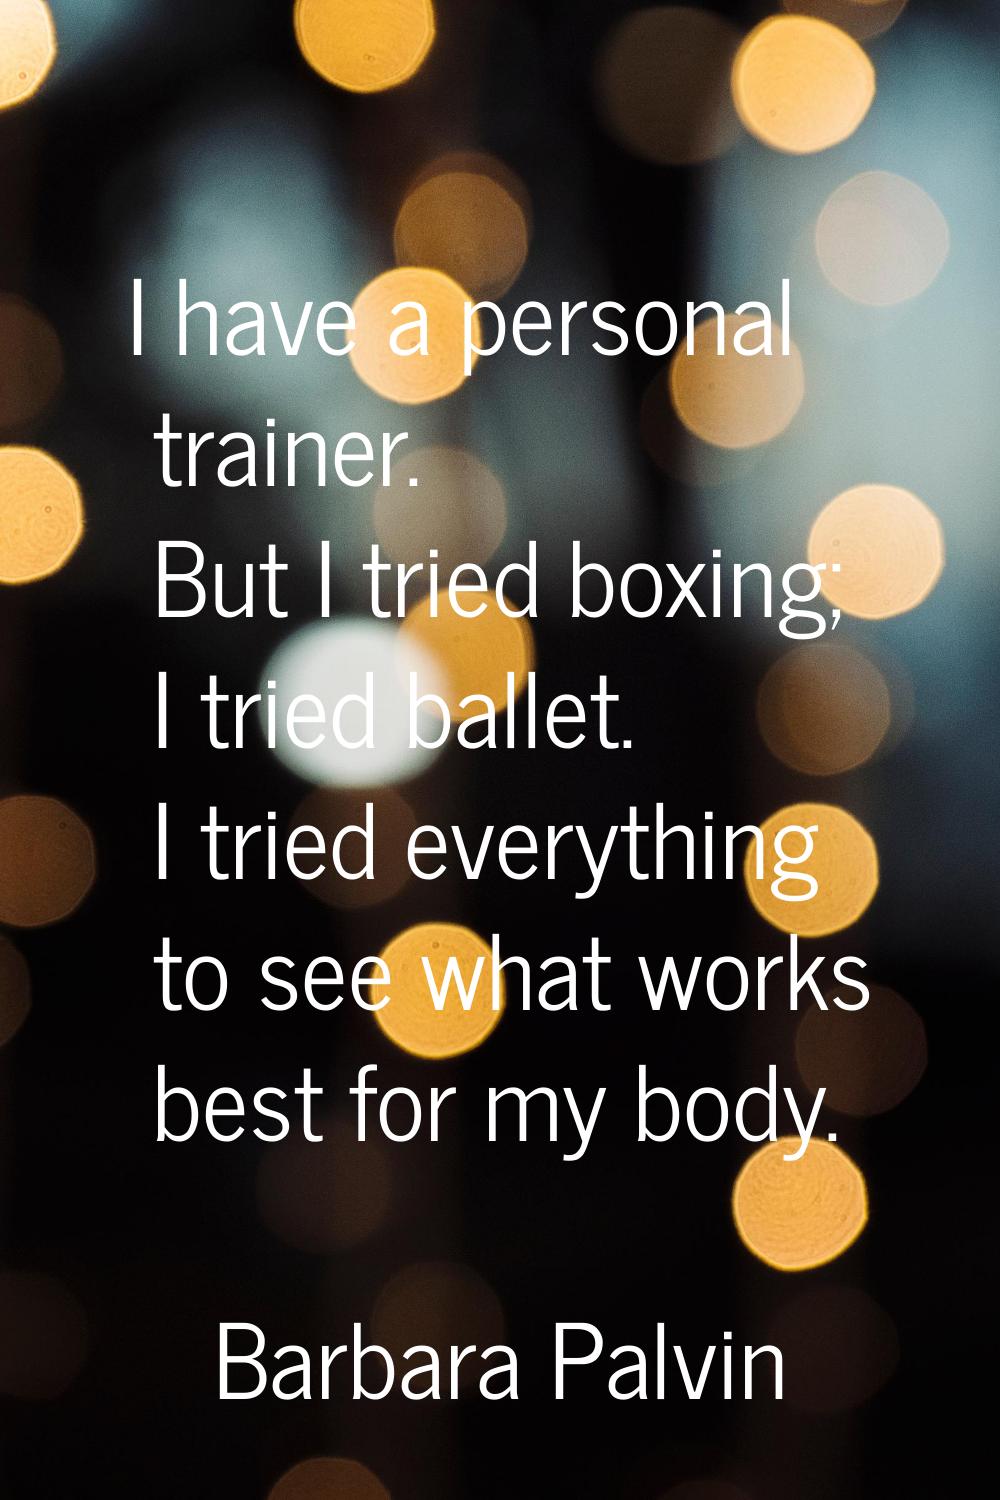 I have a personal trainer. But I tried boxing; I tried ballet. I tried everything to see what works